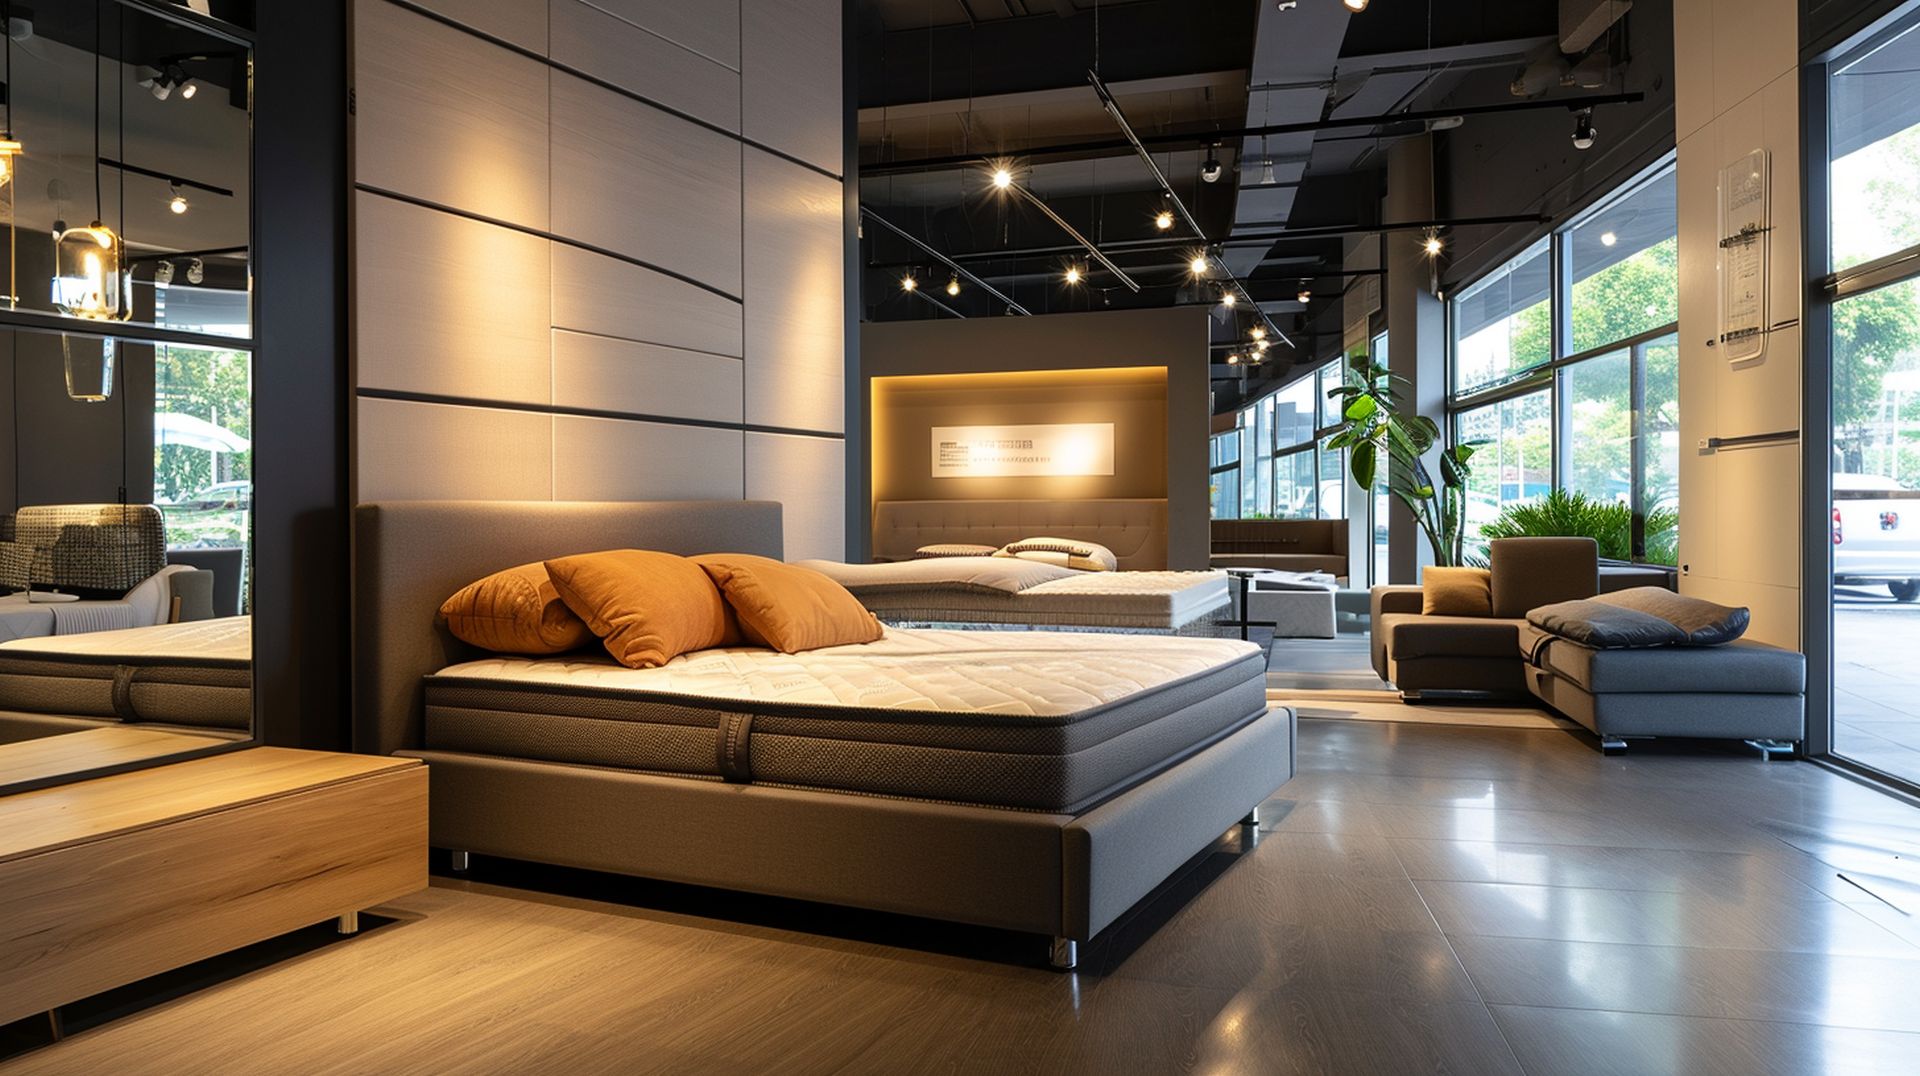 If you're looking for a new bed, mattress stores in Passaic offer the best customer and delivery service, financing, and warranties in New Jersey